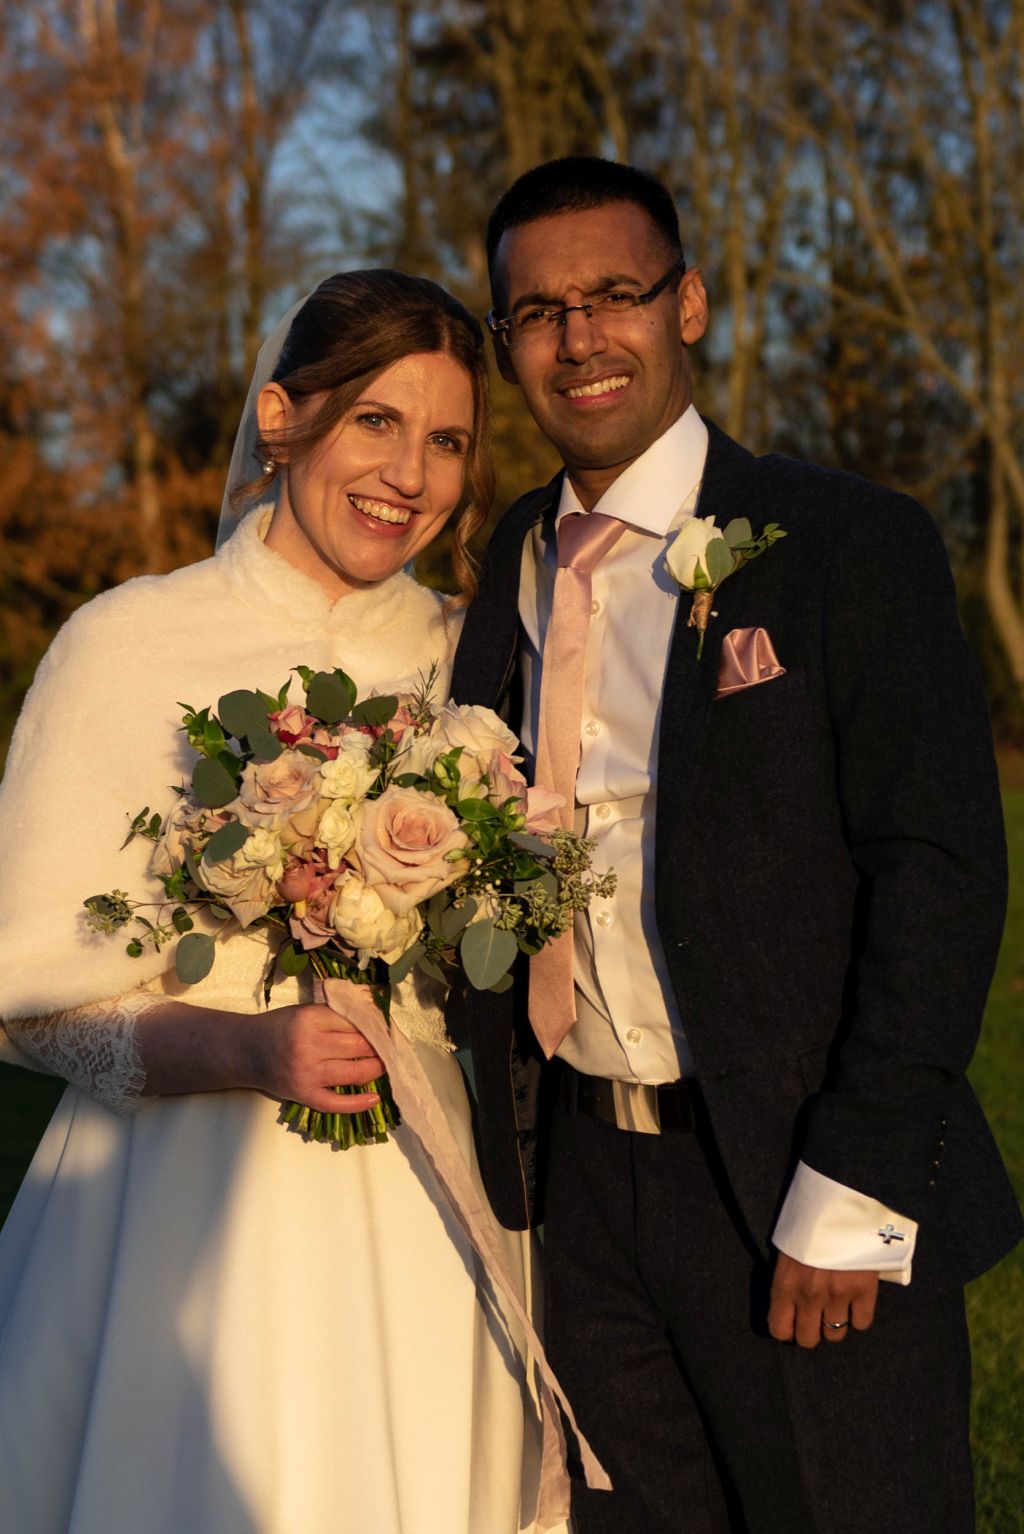 A beautiful White woman in a wedding dress is full of joy as she stands next to her new husband, a handsome Black man, as they pose outdoors on a sunny Autumn day